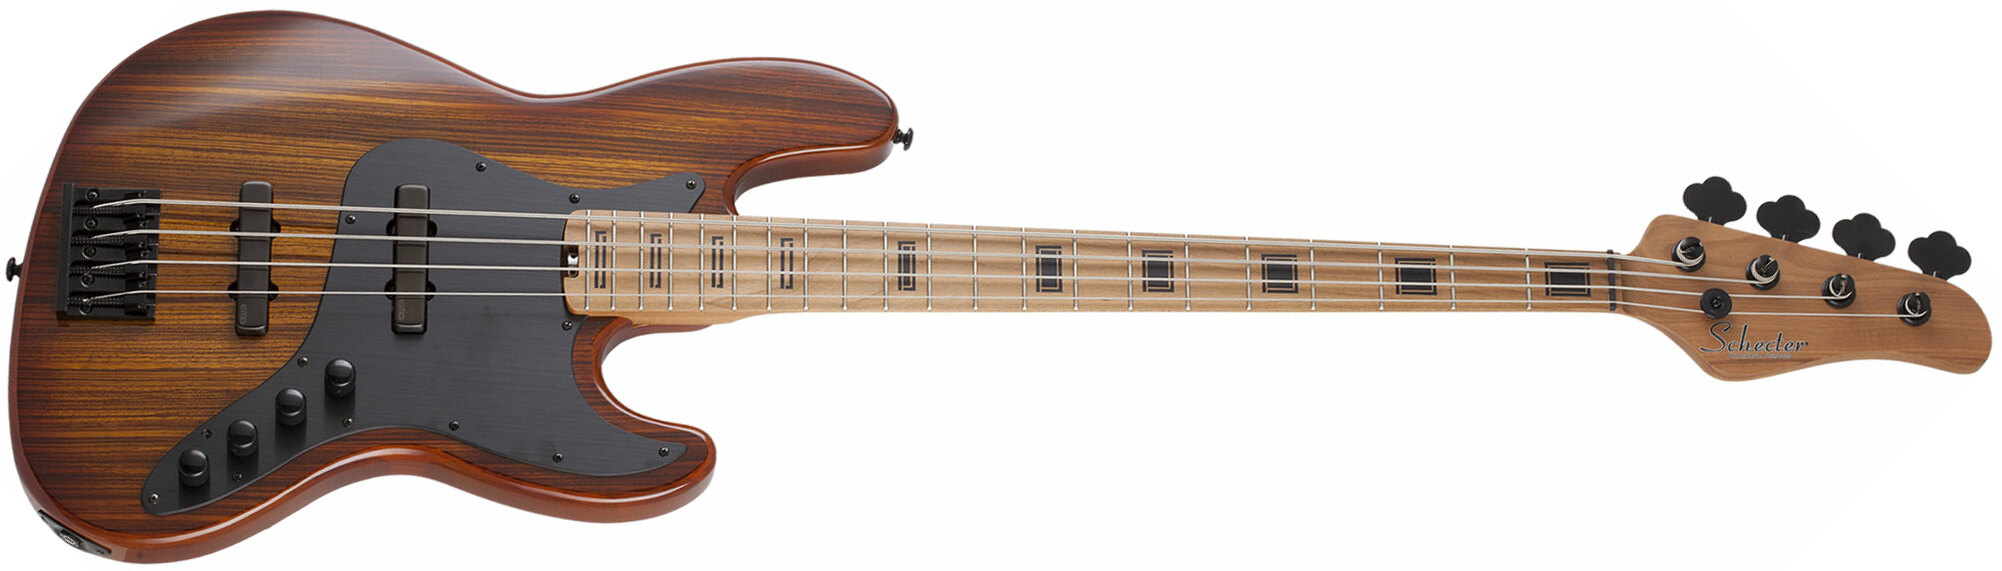 Schecter J-4 Exotic Emg Active Mn - Faded Vintage Sunburst - Solid body electric bass - Main picture